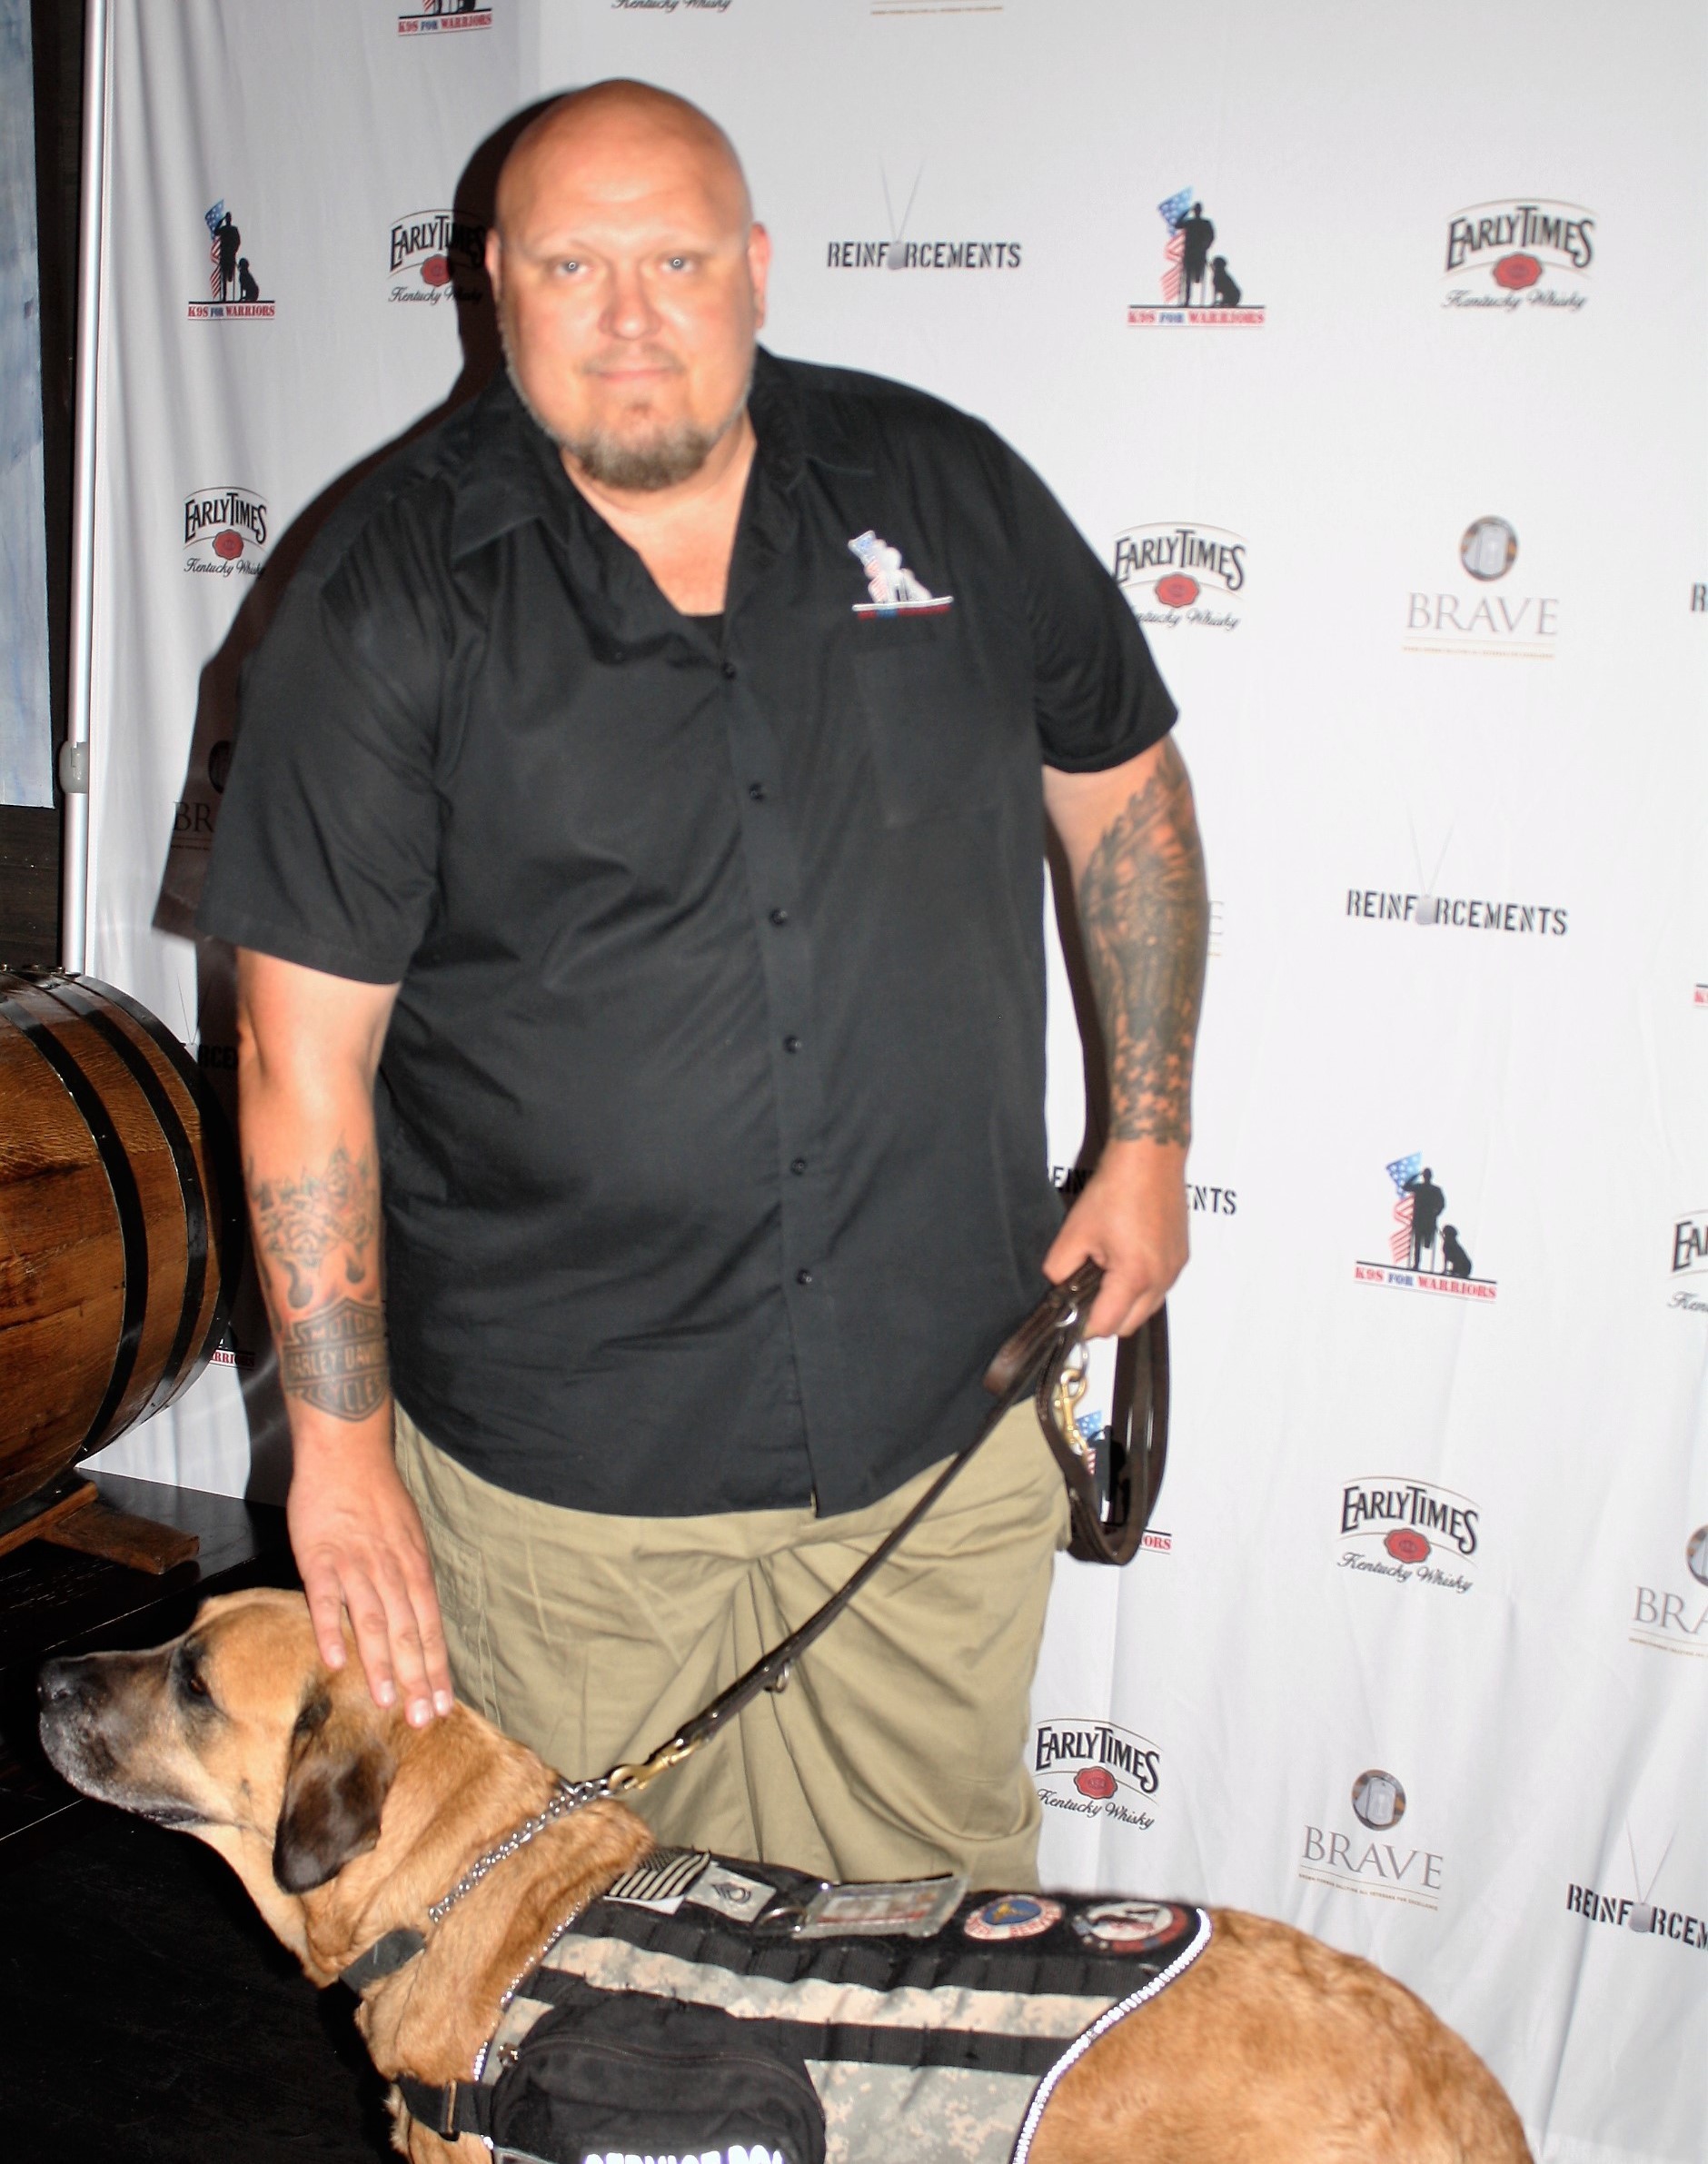 Veteran Joe Swoboda and his service dog Lilly attend the private screening of Reinforcements